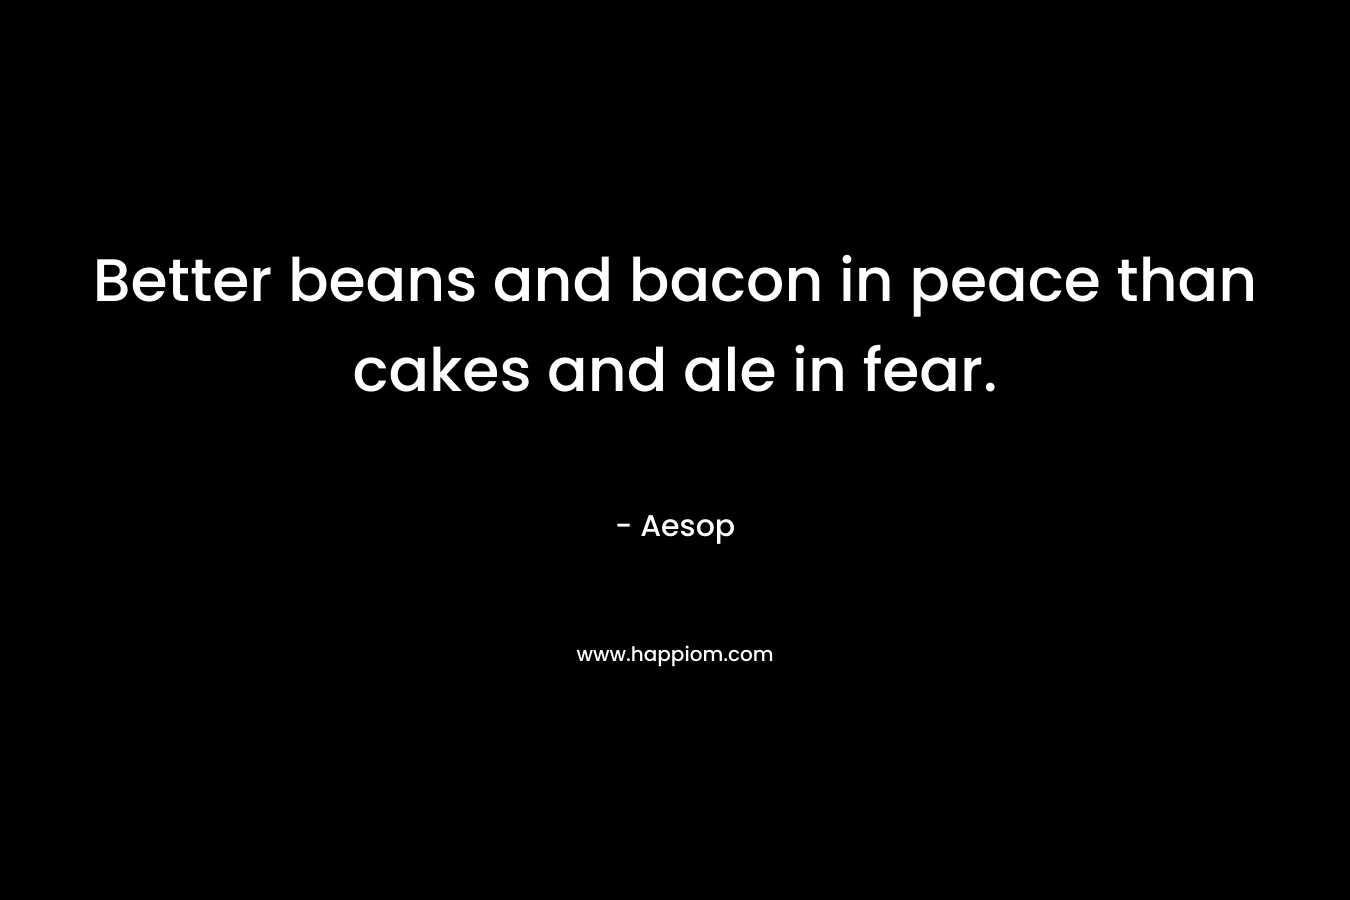 Better beans and bacon in peace than cakes and ale in fear.